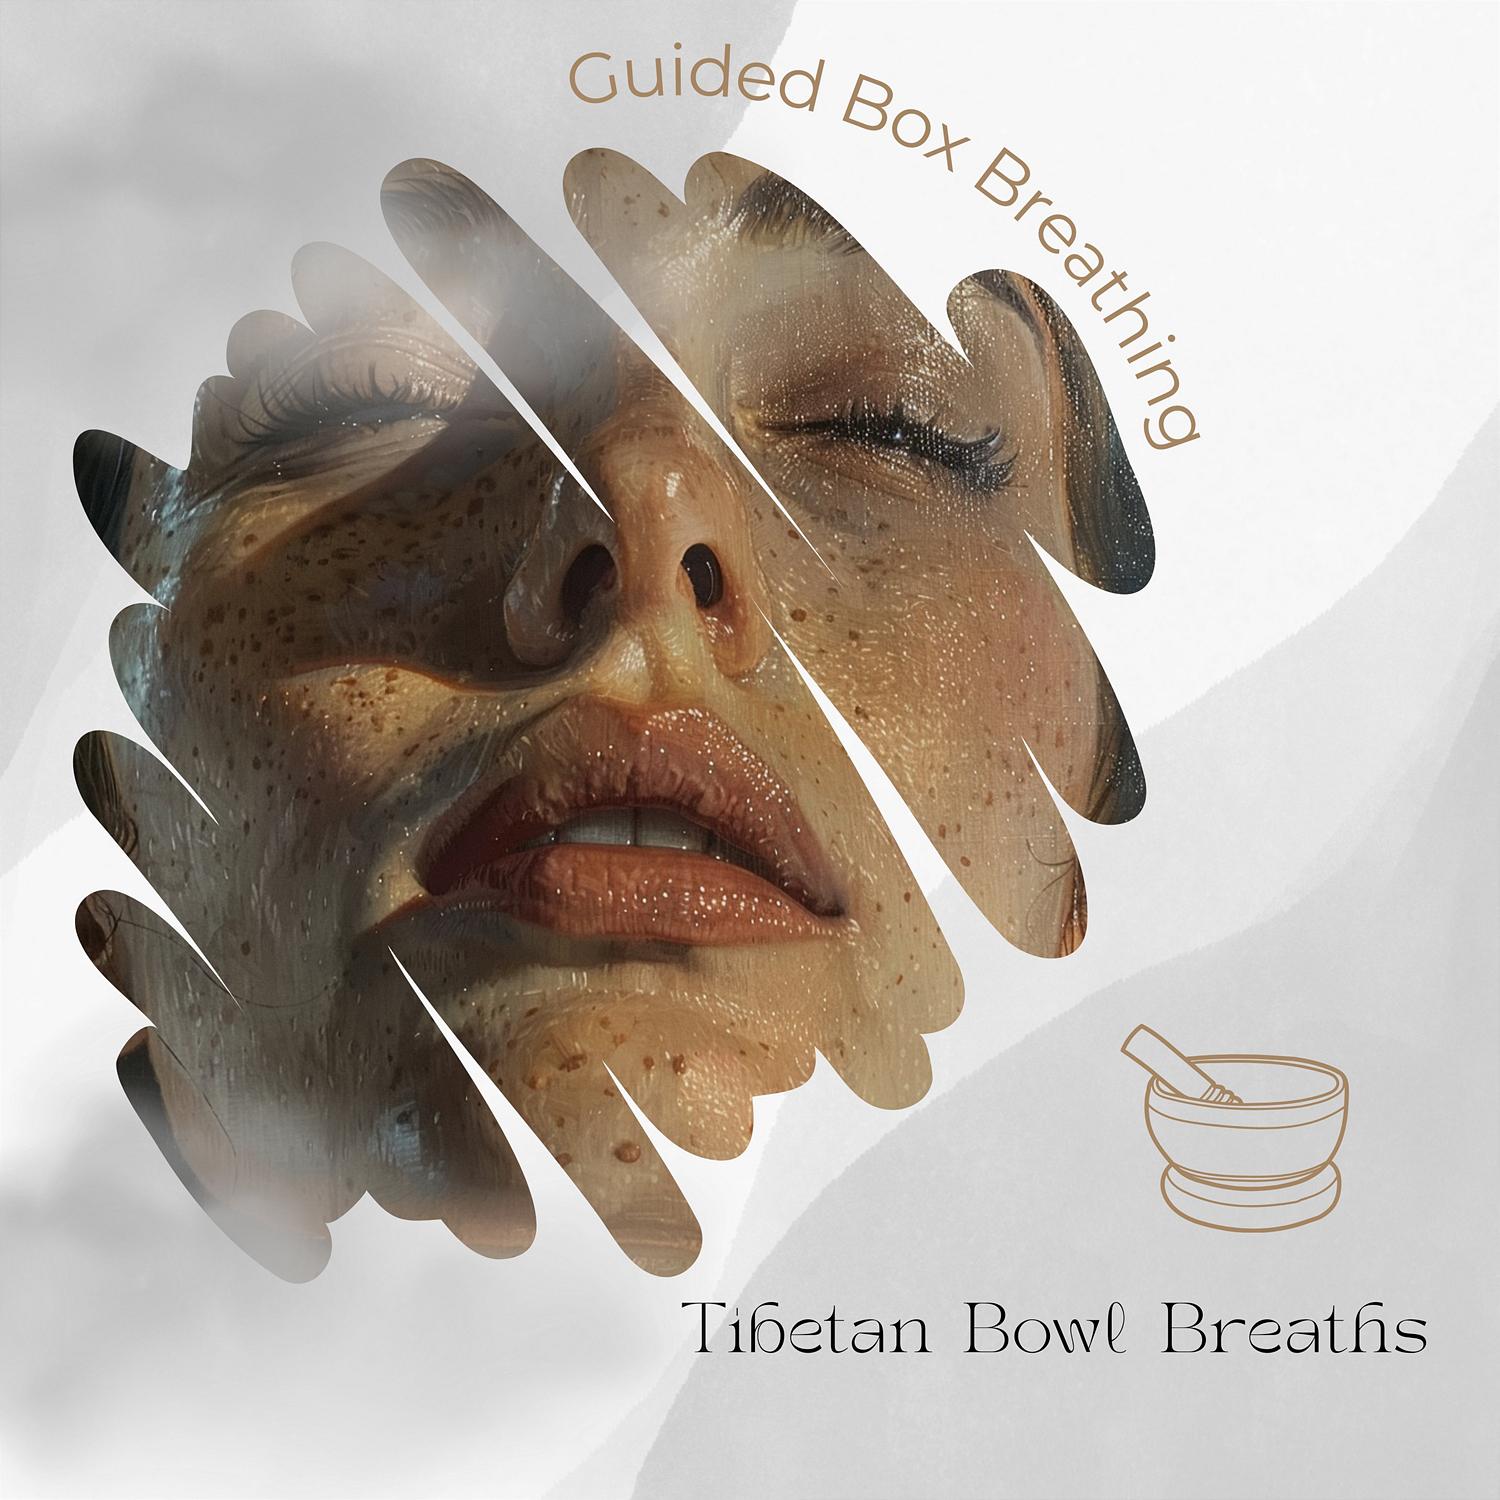 Guided Box Breathing - Bells and Bowls of the Temple (Box Breathing)